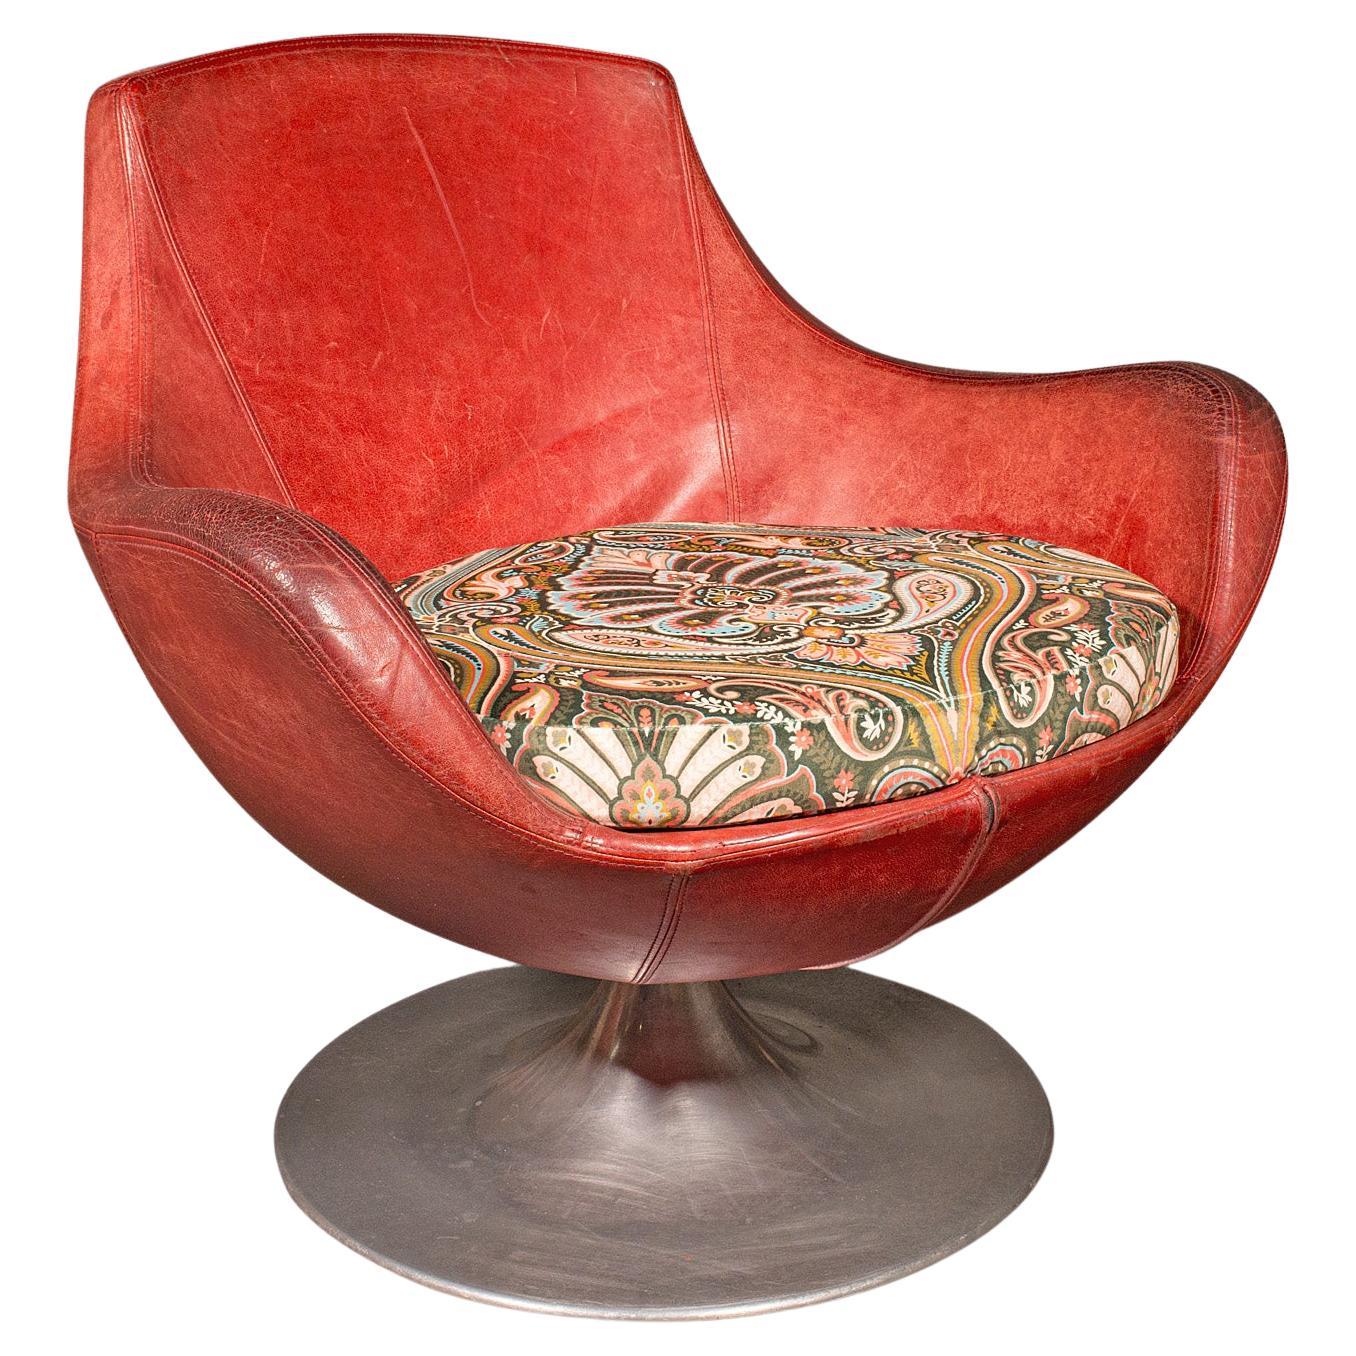 Vintage Swivel Tub Chair, Italian Leather Lounge Seat, Late 20th Century, C.1970 For Sale